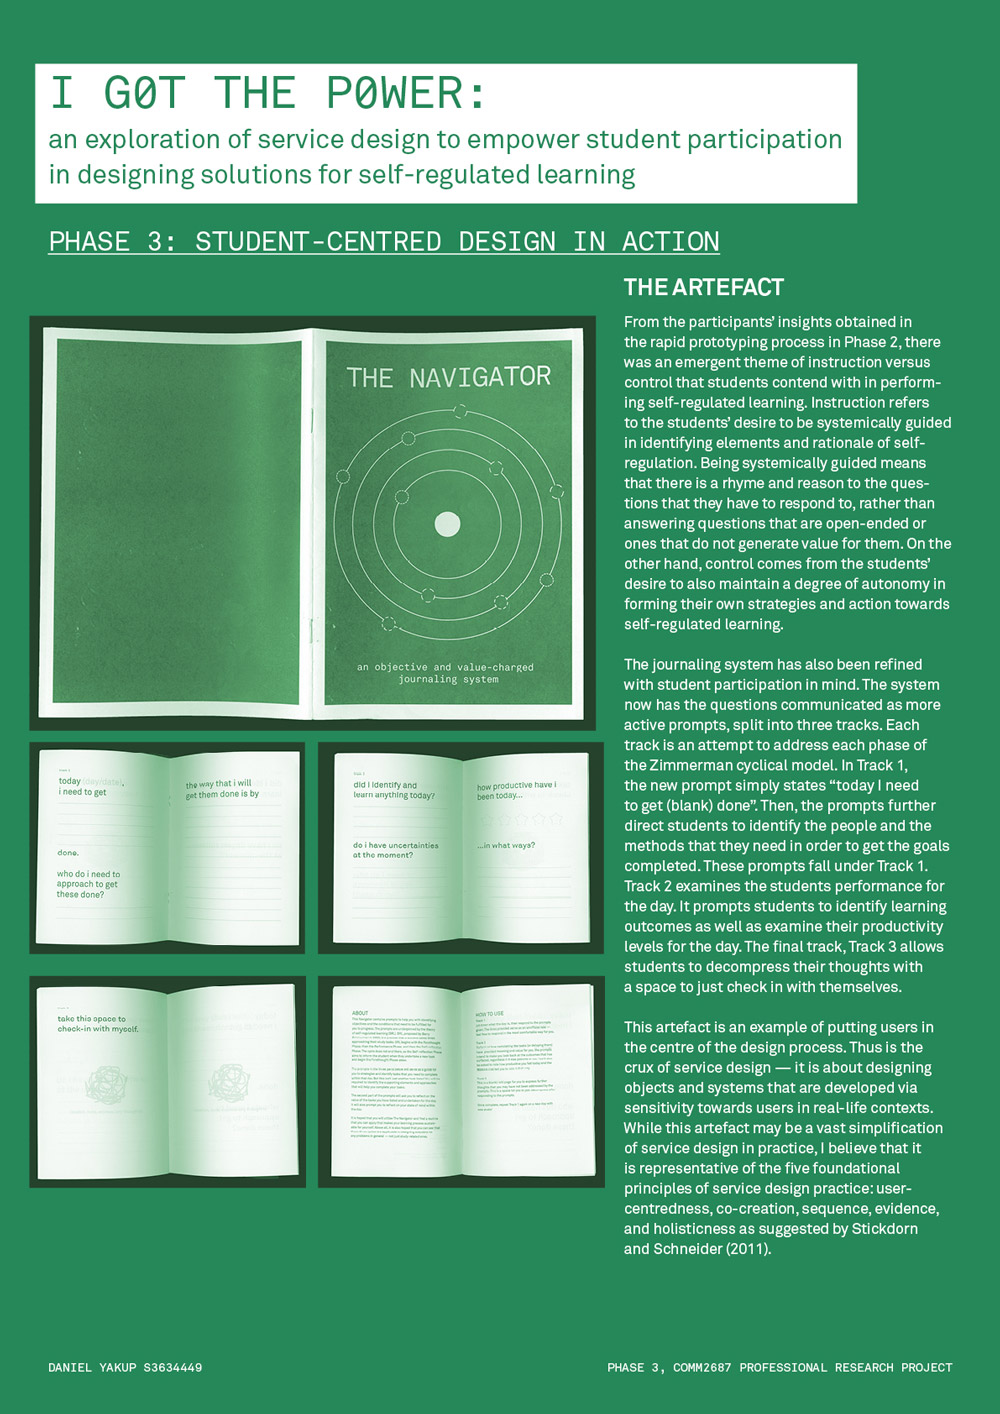 An objective-based journaling system was created at the end of Phase 3. Titled 'The Navigator', it aims at helping students identify the immediate objectives that they need to complete. The journaling system not only emphasises on conquering short-term and simple goals rather than complex and ambitious ones, but also provides a space for students to reflect on their journey towards progress. The measure of success for The Navigator is not in quantifying how many goals were completed in a day, but rather in encouraging students to check in with themselves and sustainably progress towards any goals they have set out to complete.